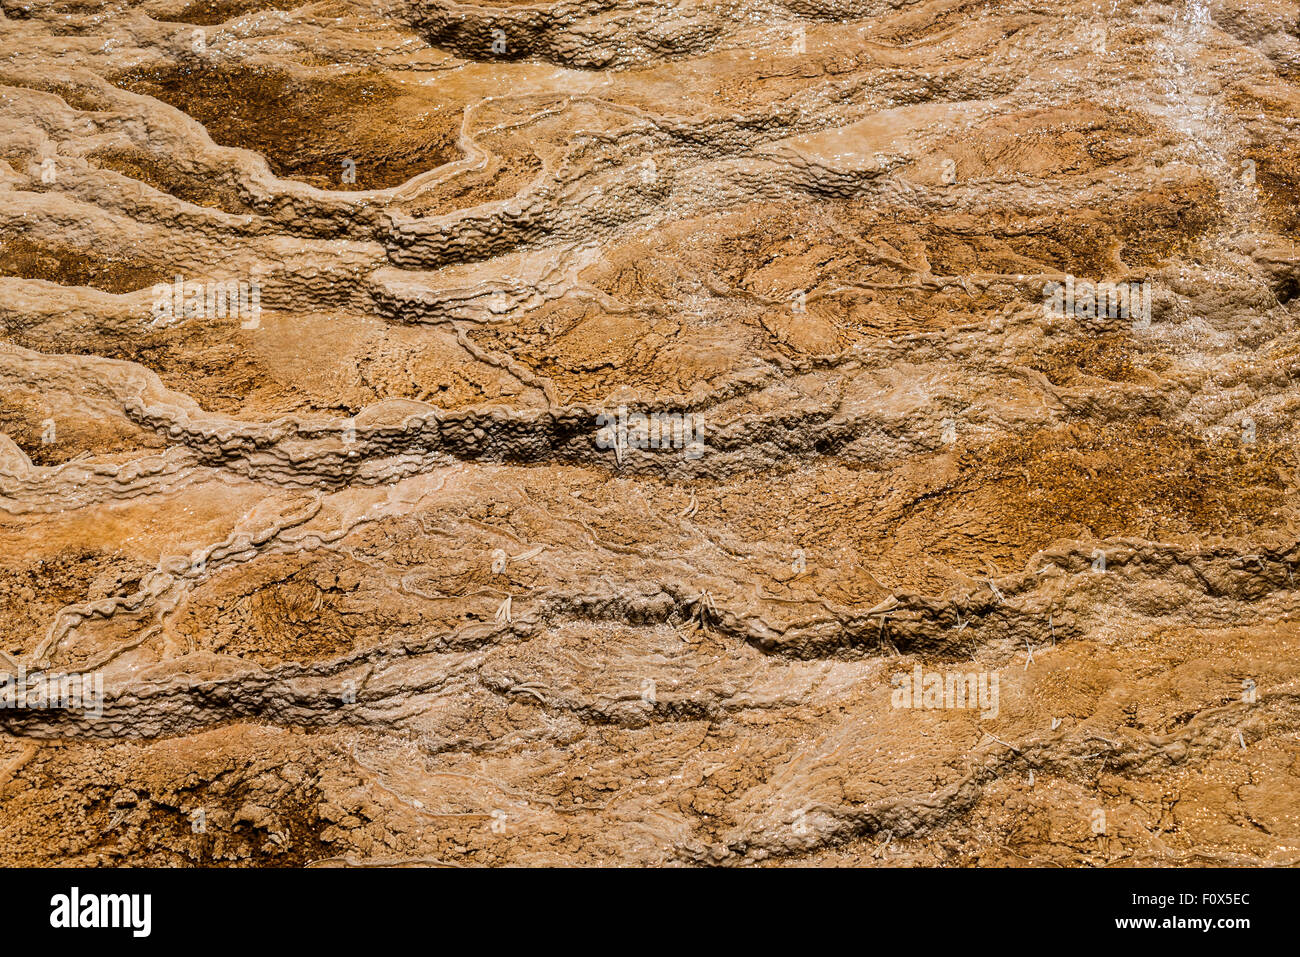 Pattern of Mineral deposition, Mammoth Hot Springs,Yellowstone National Park , Wyoming, USA Stock Photo